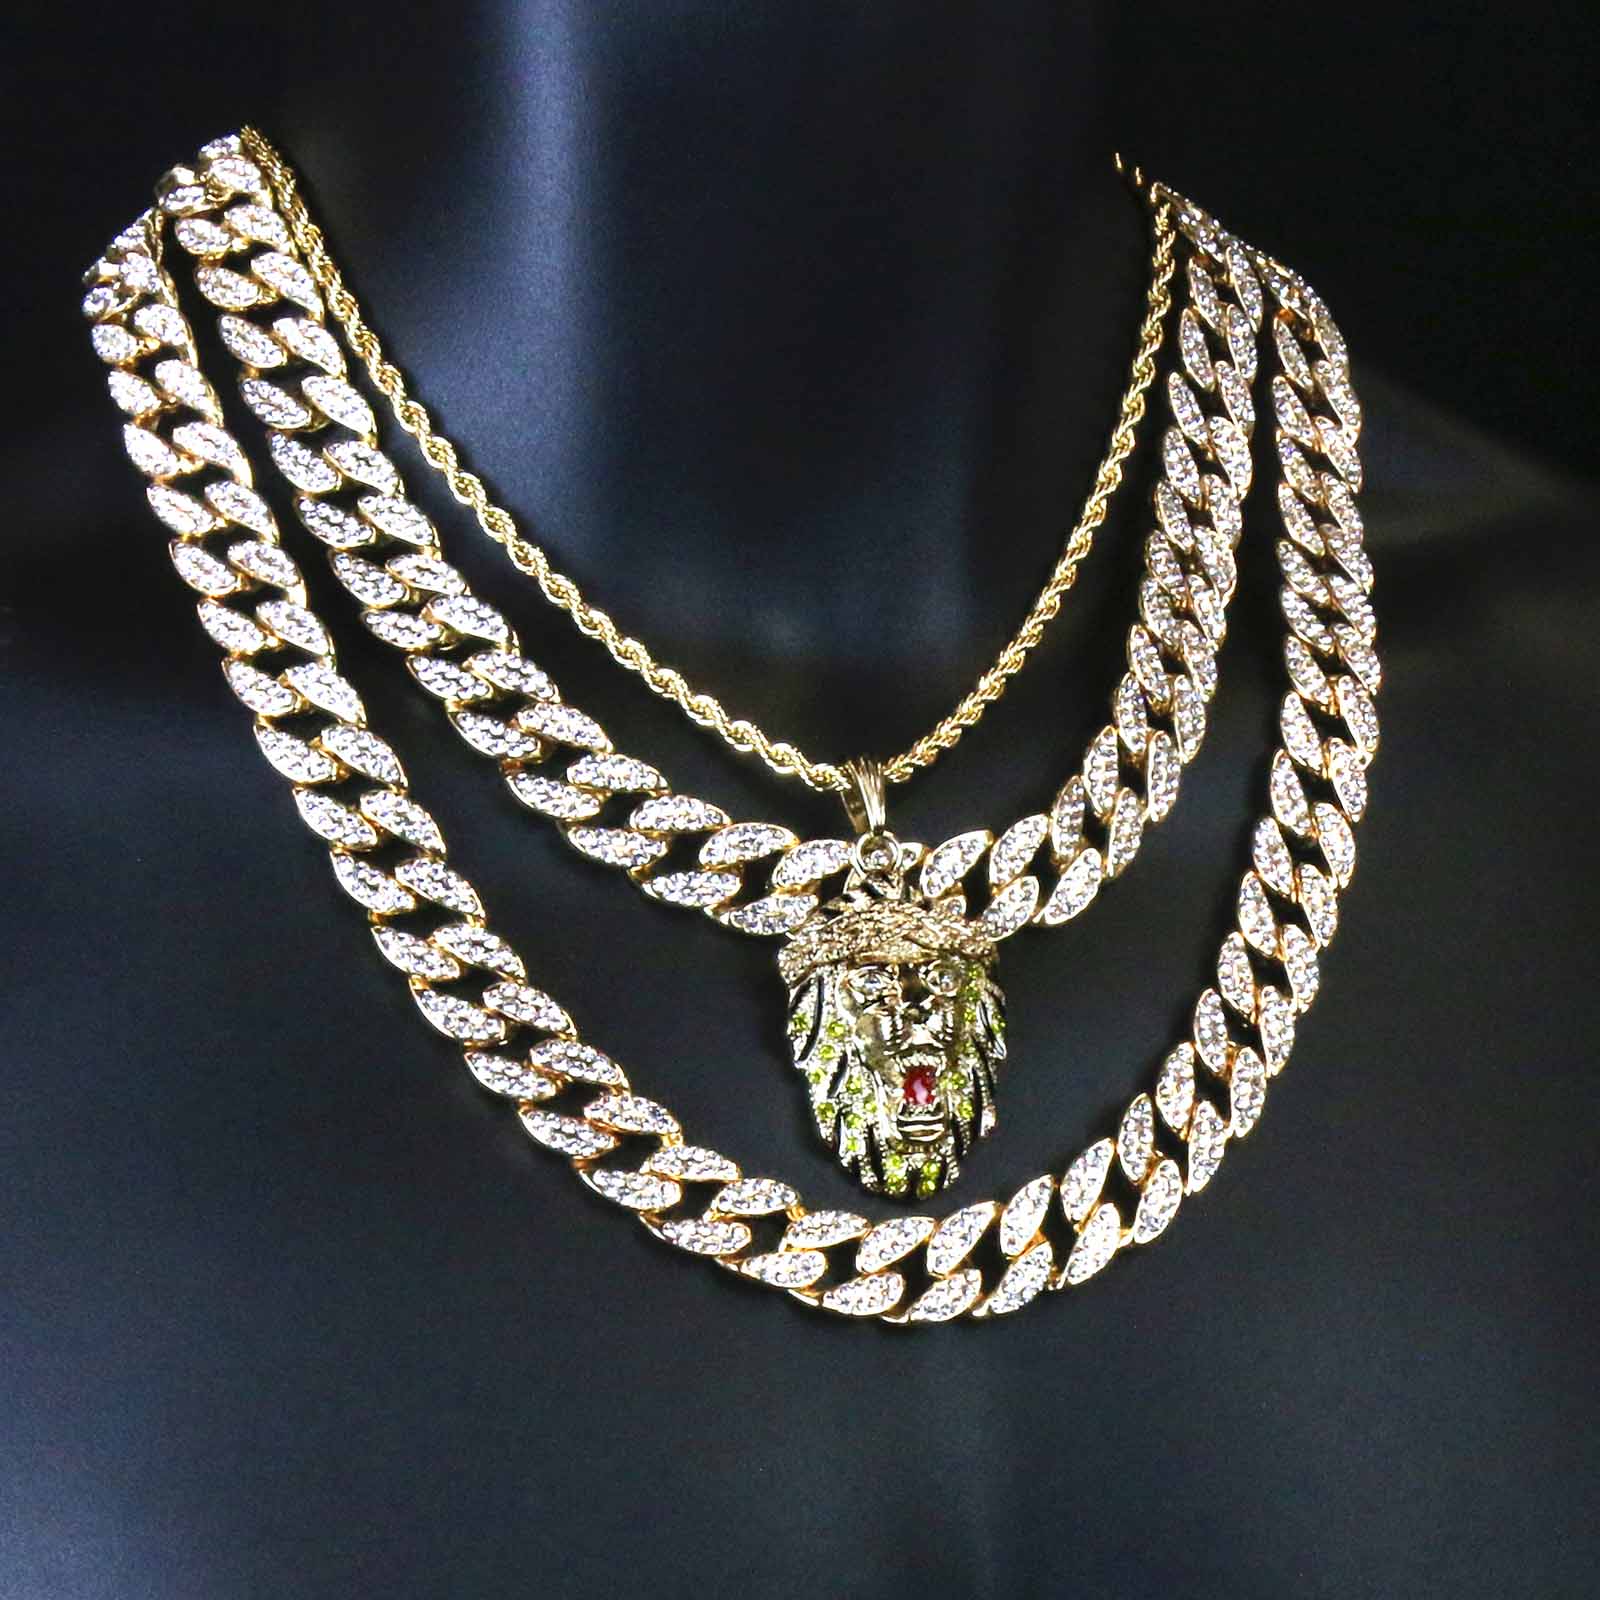 2 CUBAN CHAIN & GOLD YELLOW LION Necklace | BlingKingstar Jewelry ...